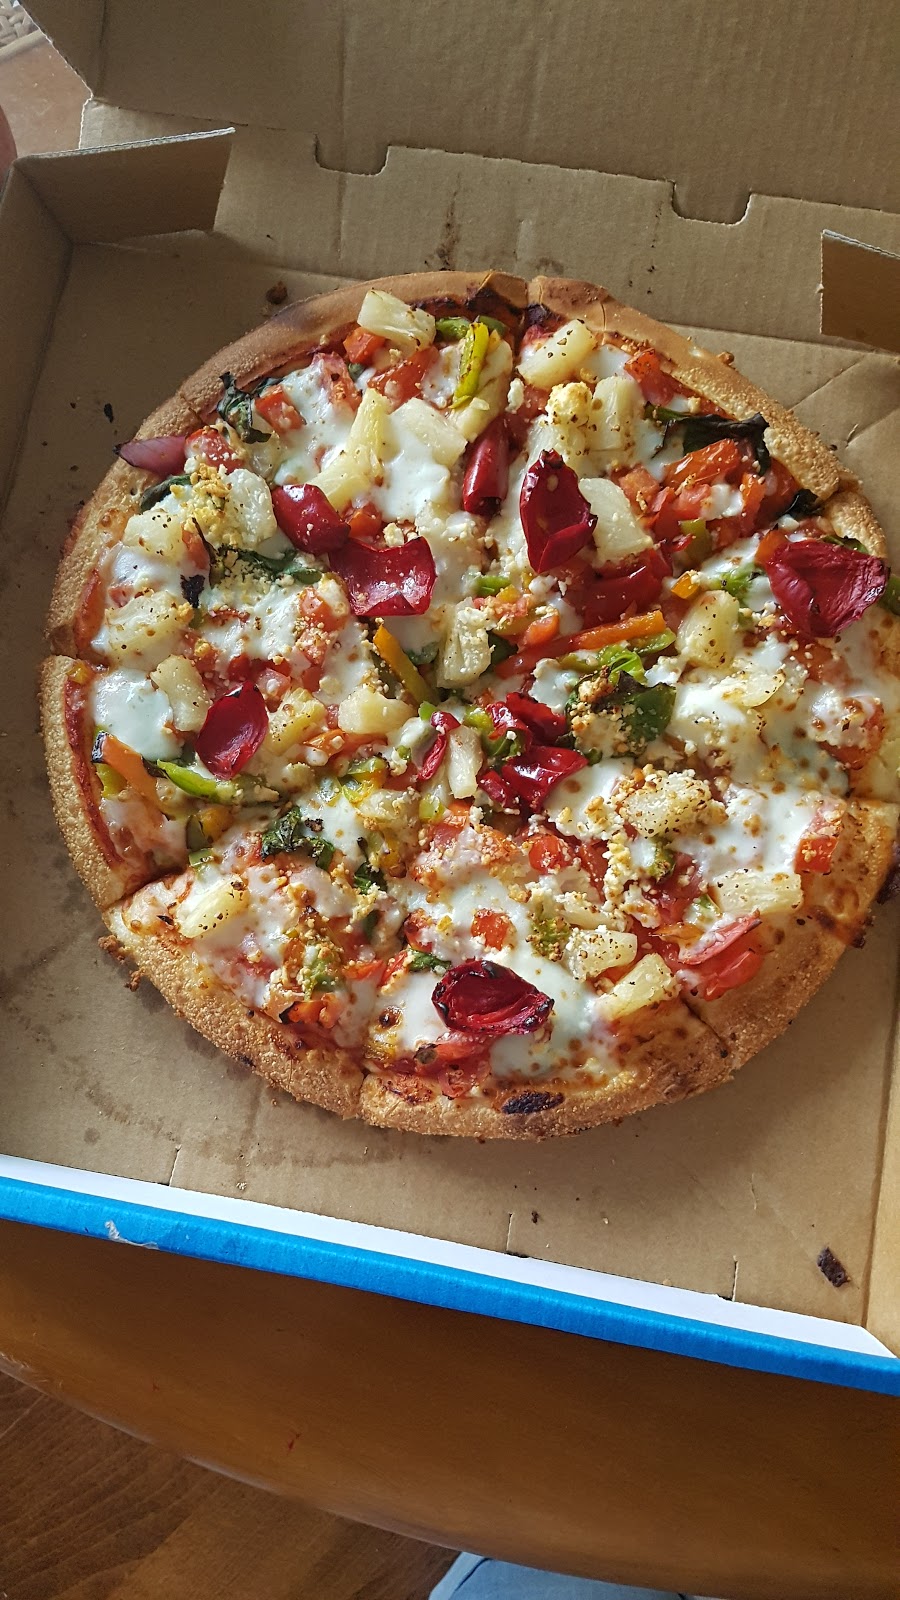 Dominos Pizza Pimpama | meal takeaway | city Shopping Centre, 1/102 Pimpama Jacobs Well Rd, Pimpama QLD 4209, Australia | 0755472020 OR +61 7 5547 2020